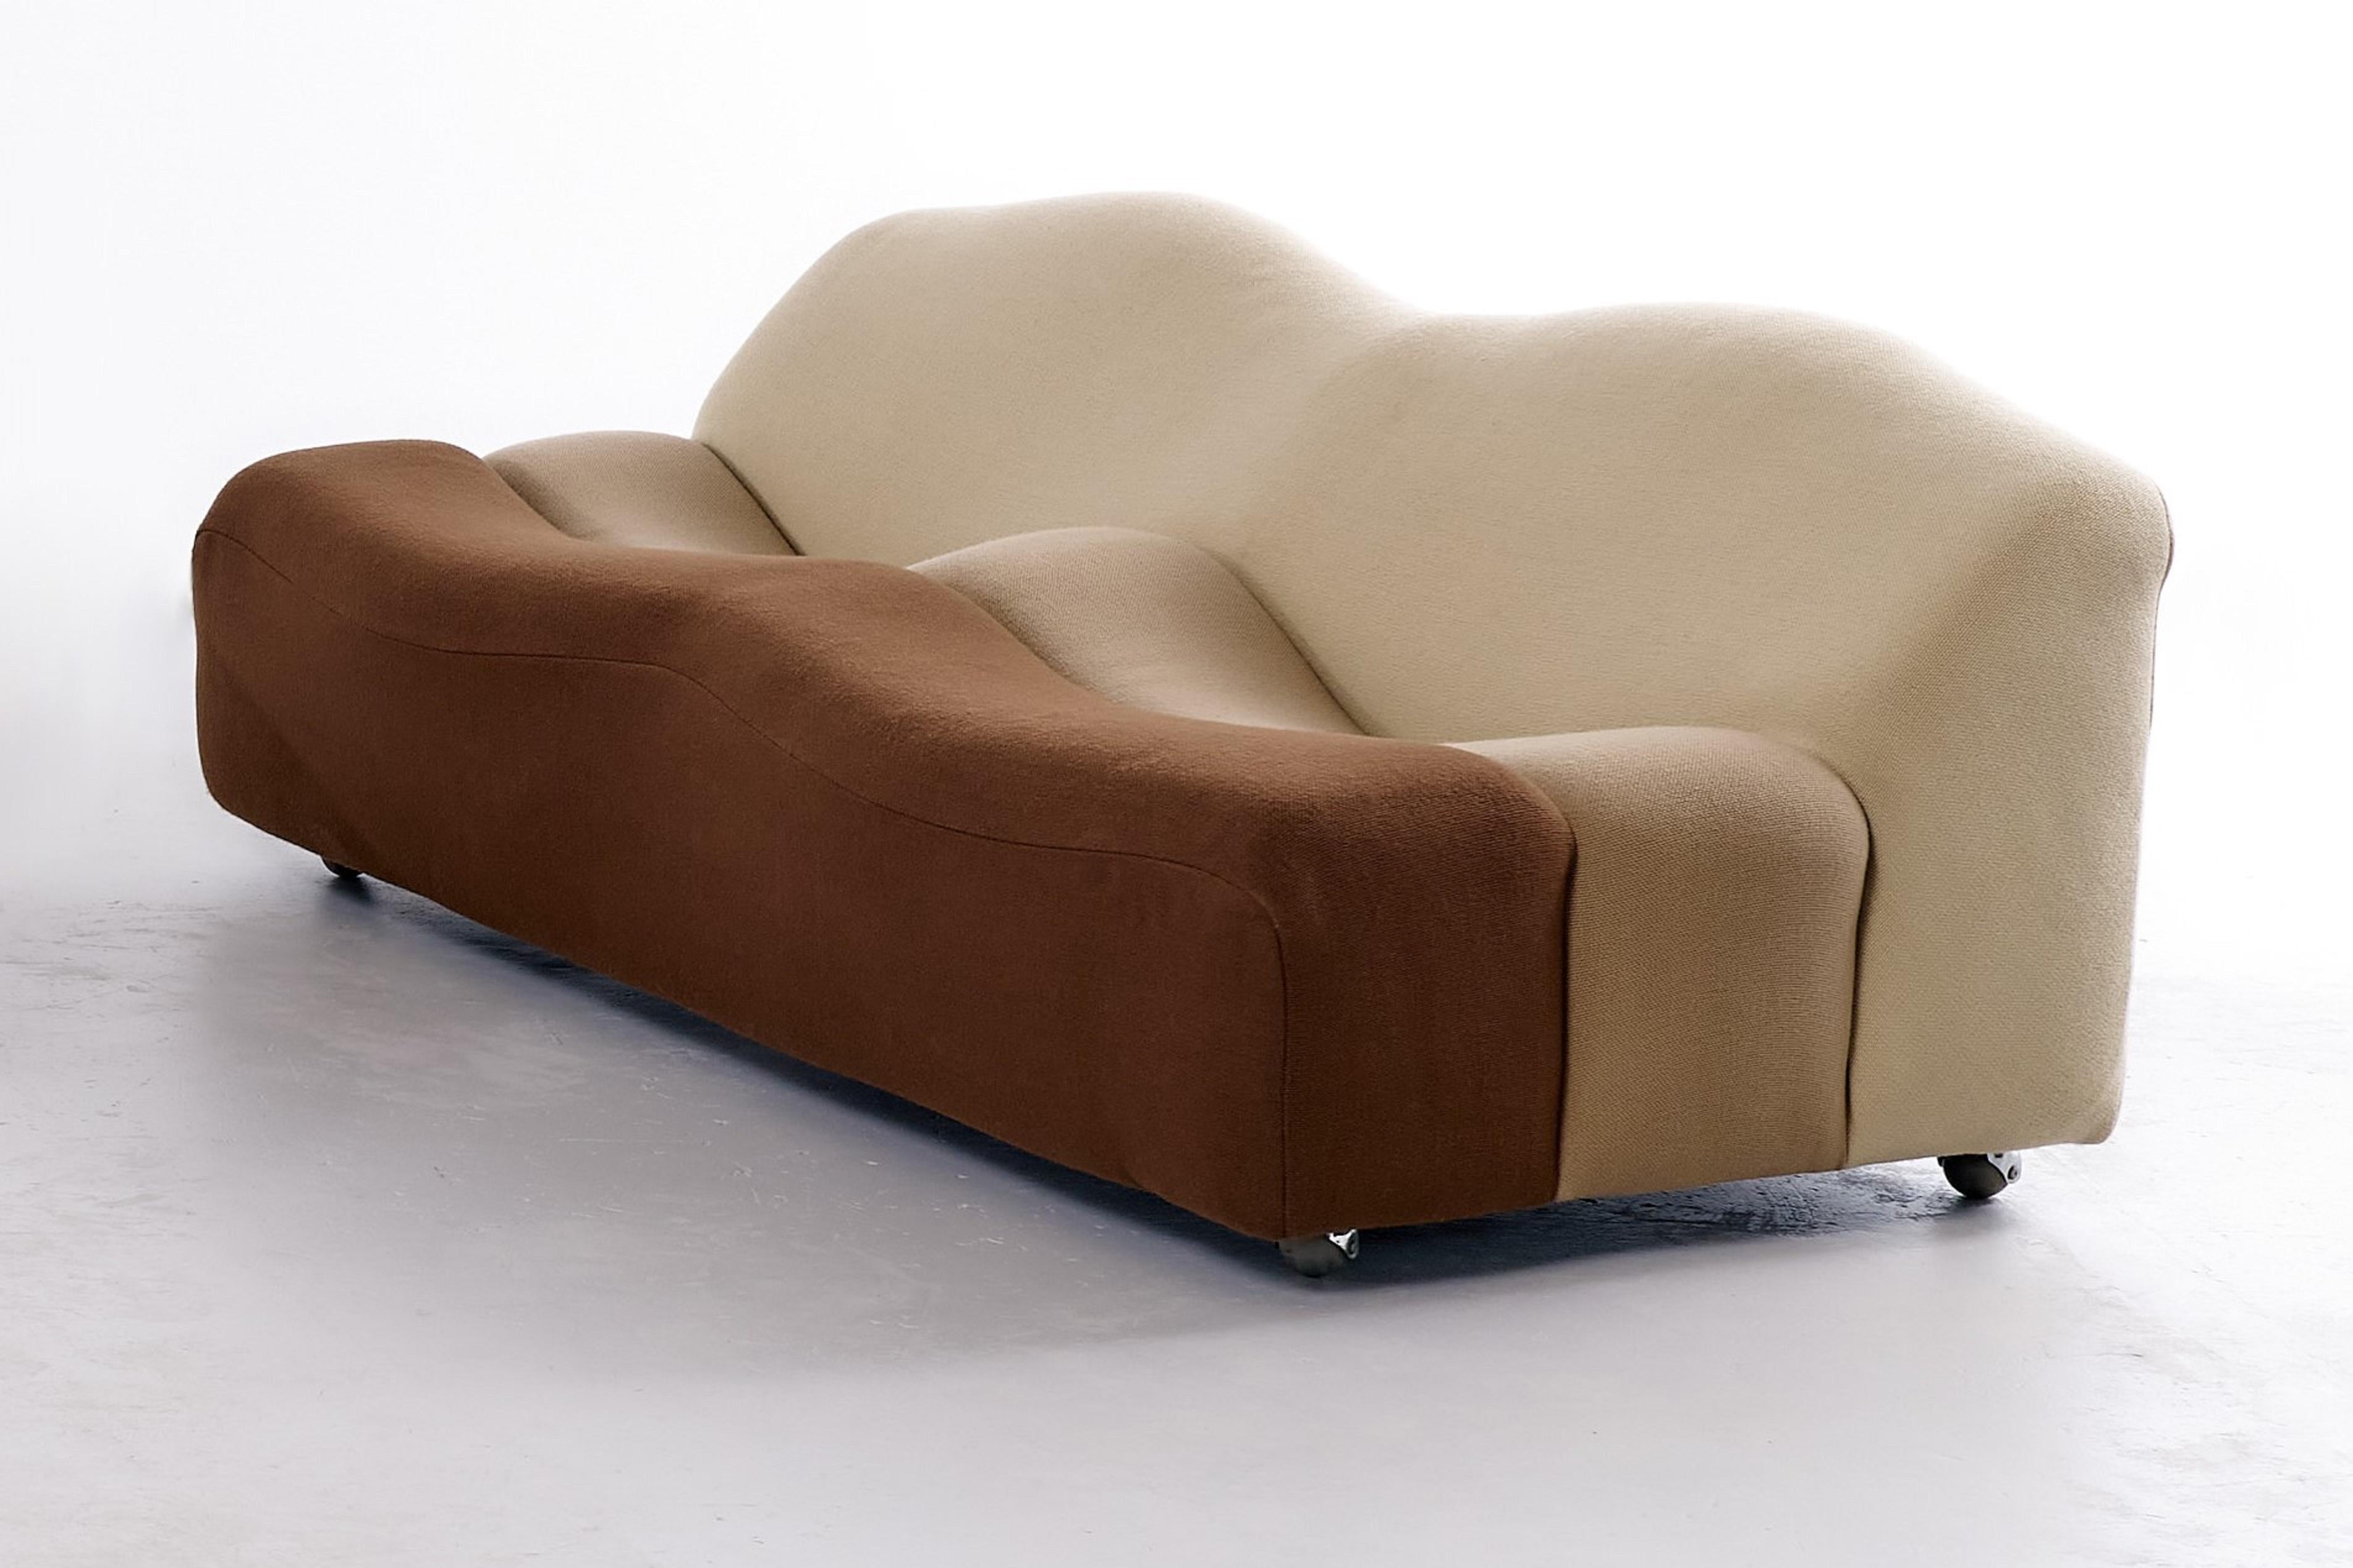 The ABCD sofa, designed by Pierre Paulin in 1968, is indeed a remarkable piece of furniture that exemplifies his innovative and forward-thinking approach to design. This sofa is highly distinctive and stands out due to its unique and unconventional